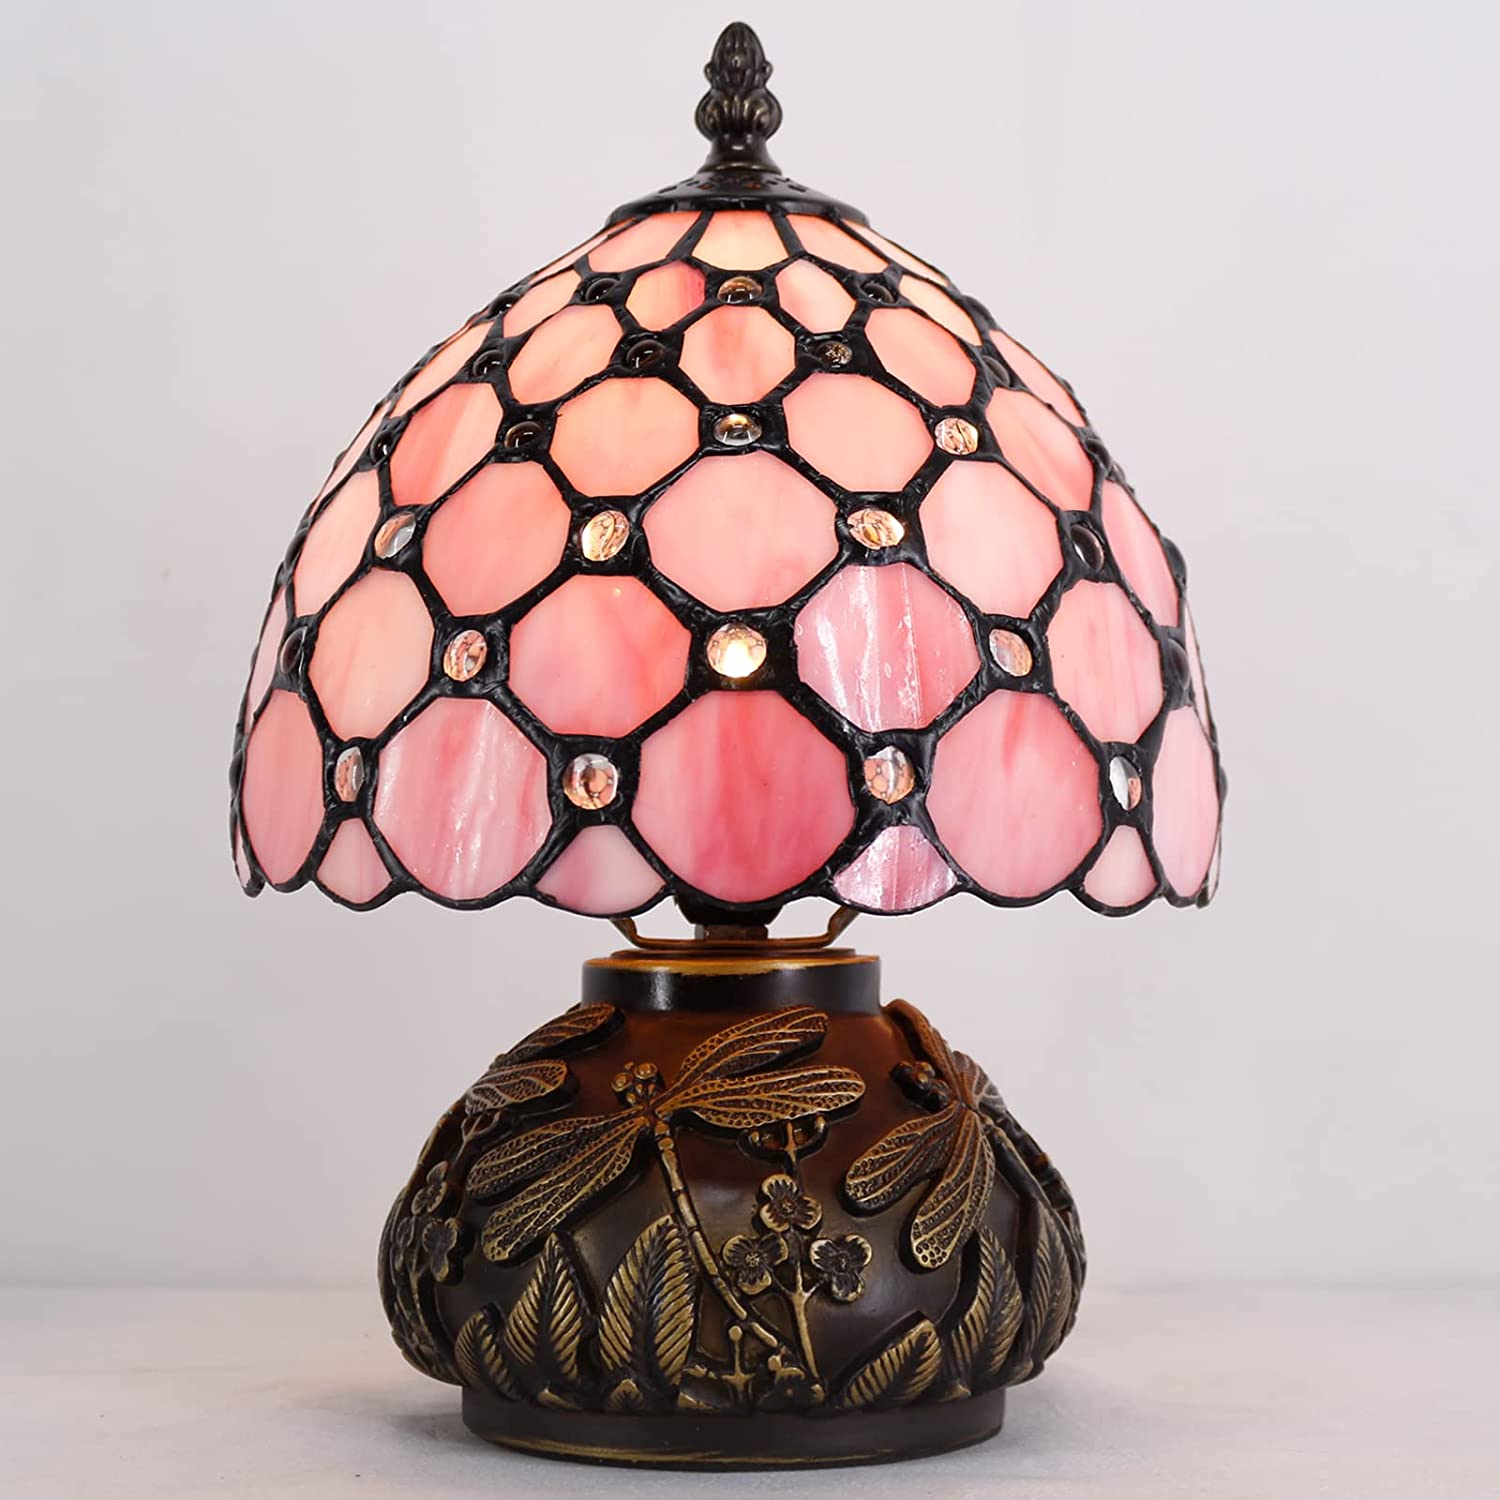 WERFACTORY Small Tiffany Lamp W8H11 Inch bead Stained Glass Table Lamp Bronze Mushroom Resin Base Mini Accent Lamp Decor Bedroom (Pink Bead)